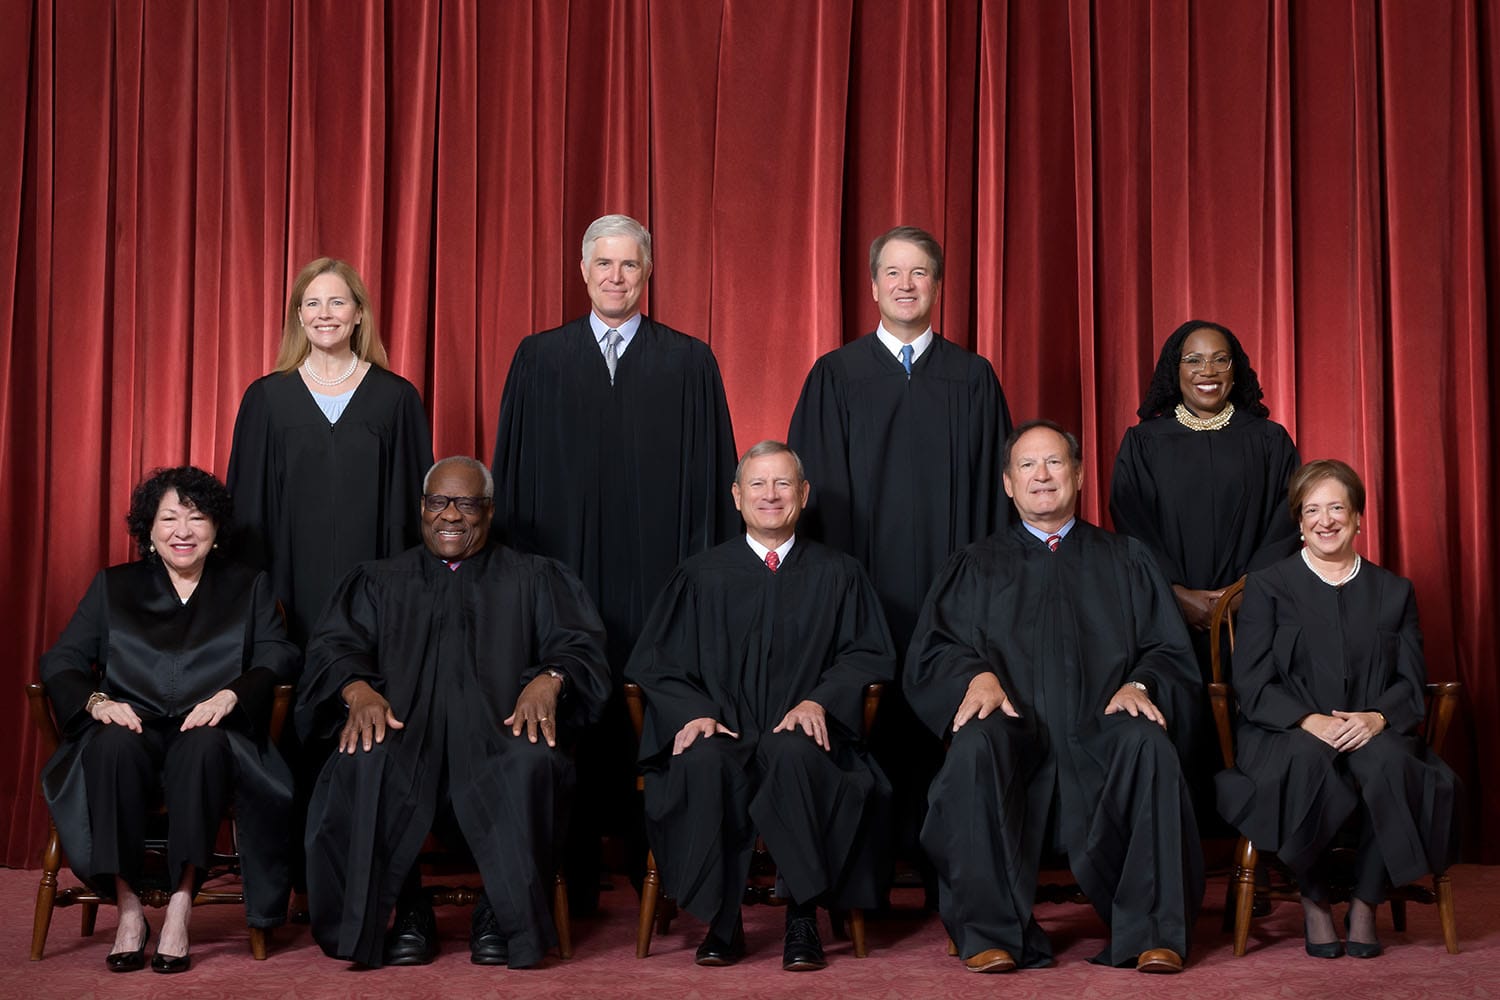 the official portrait of the Roberts court